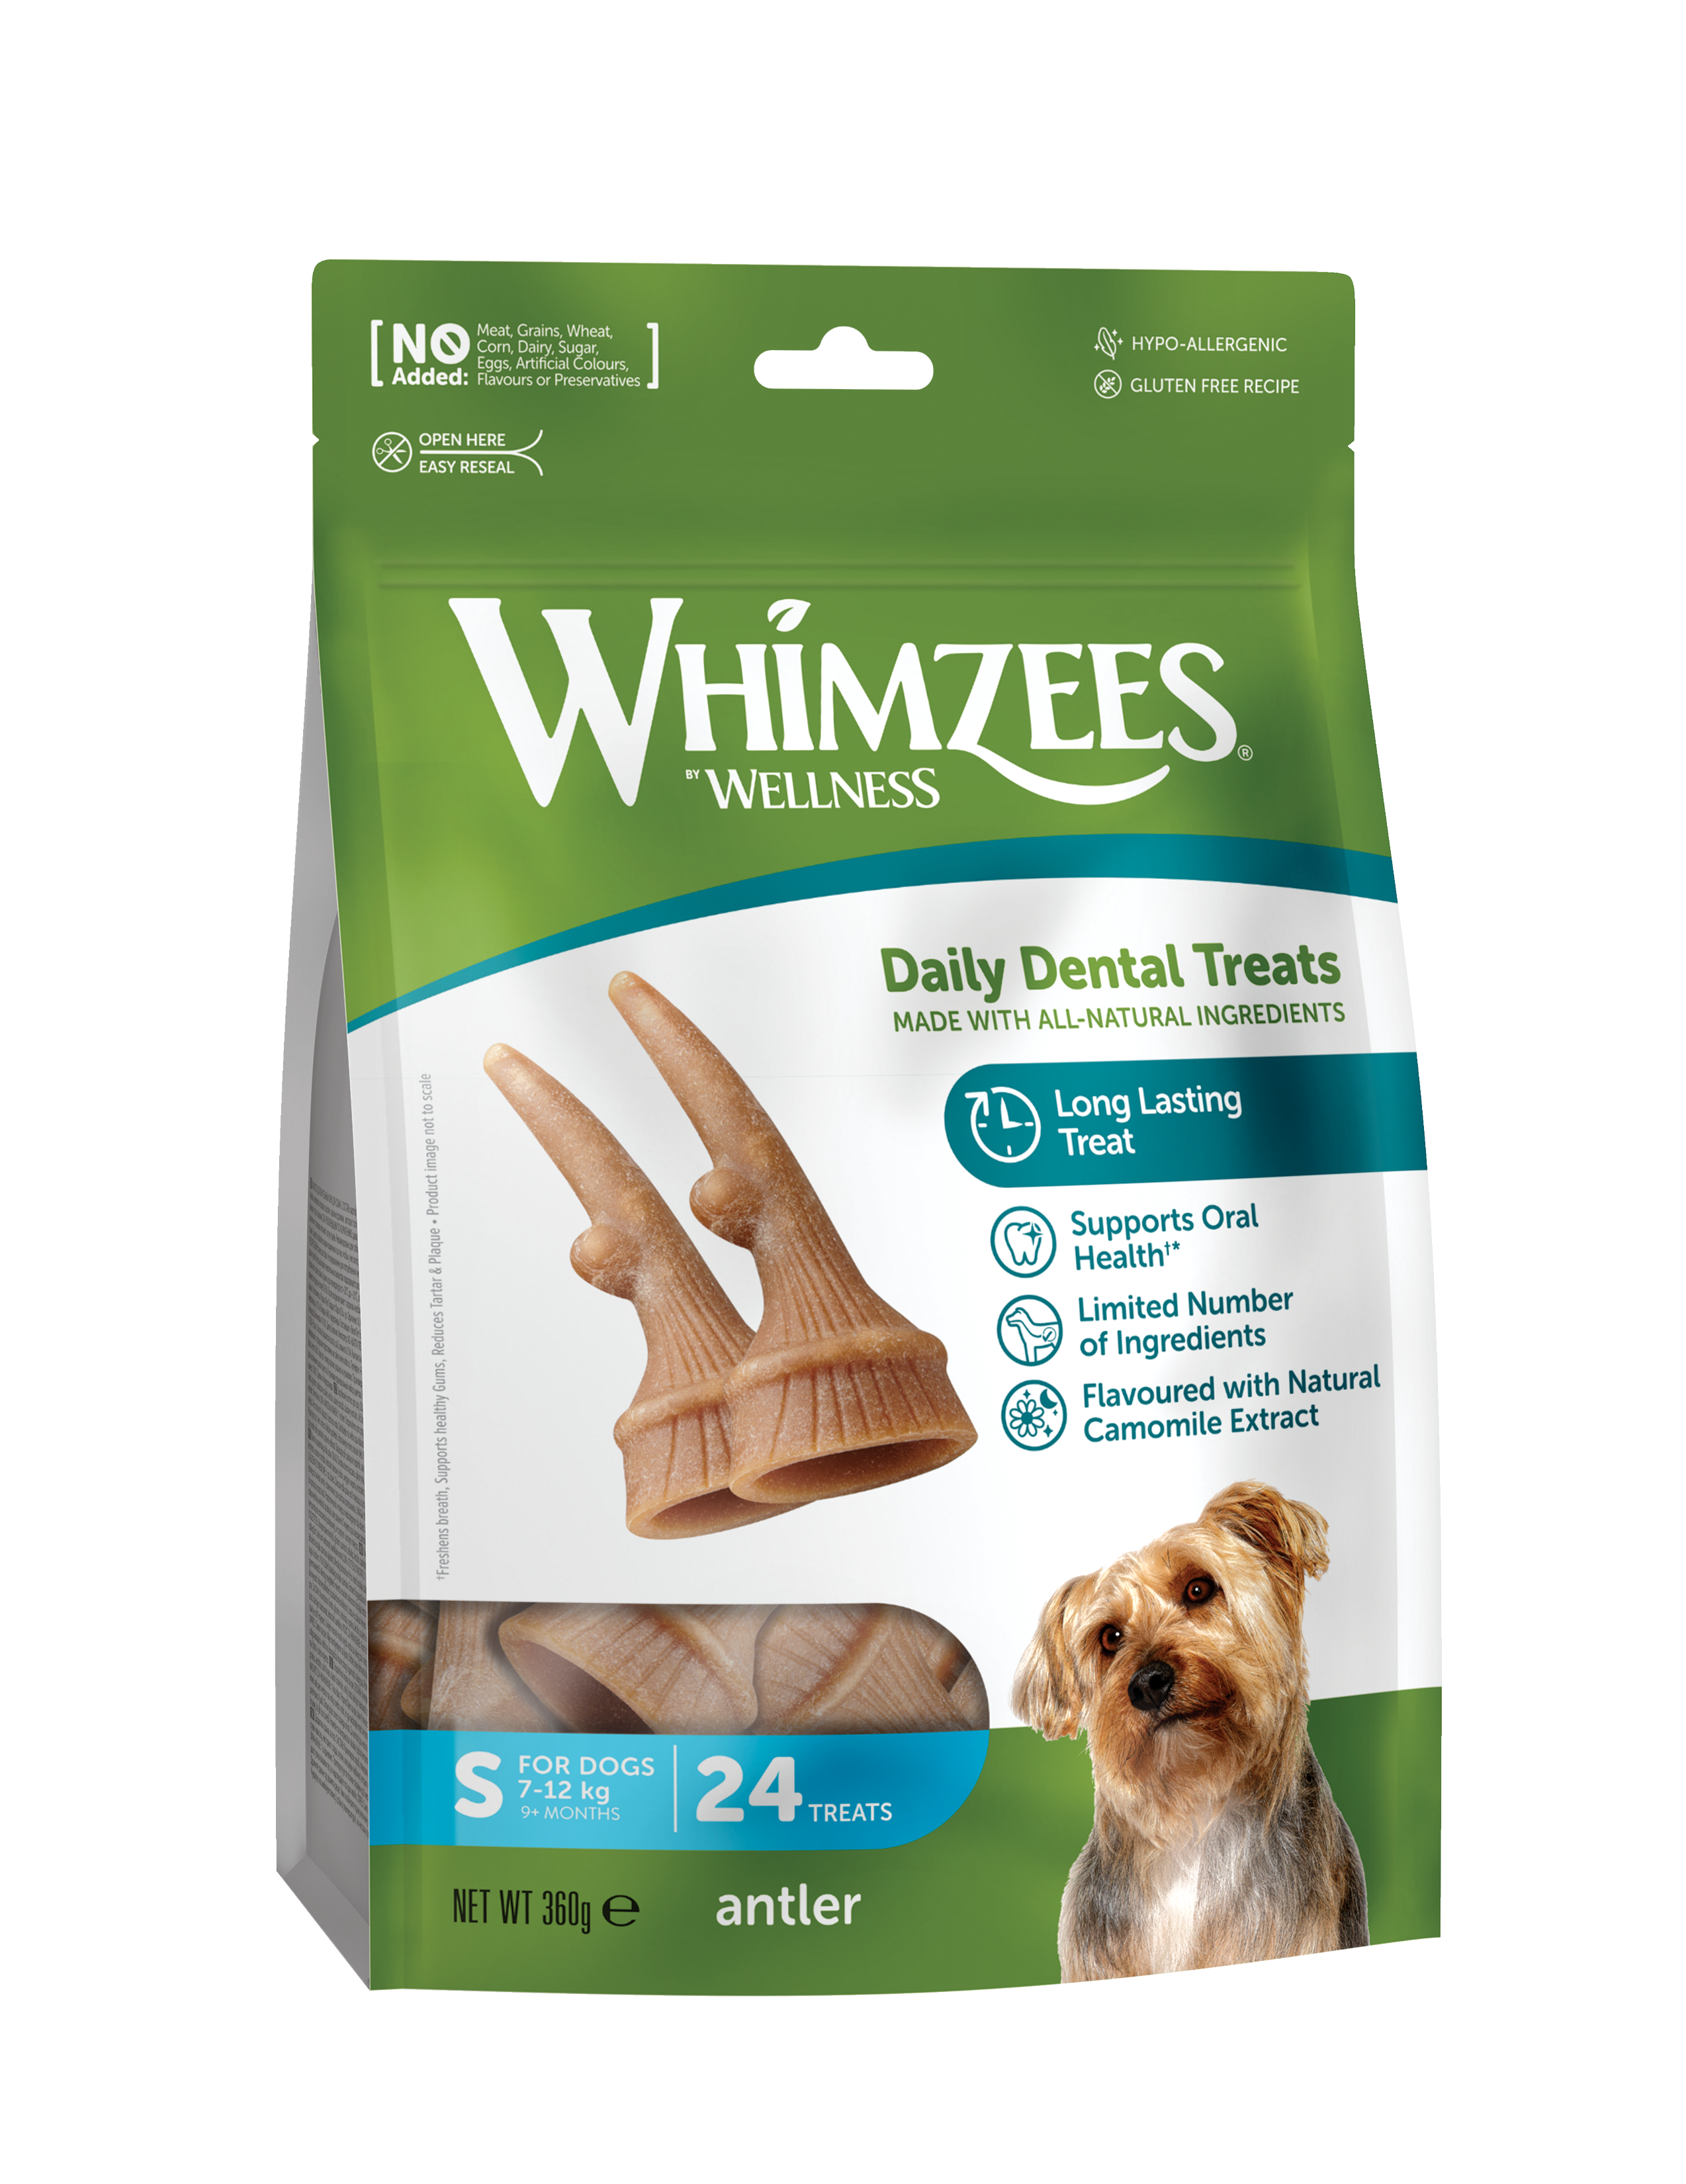 Whimzees Occupy Dental Treats Value Bags - Antler